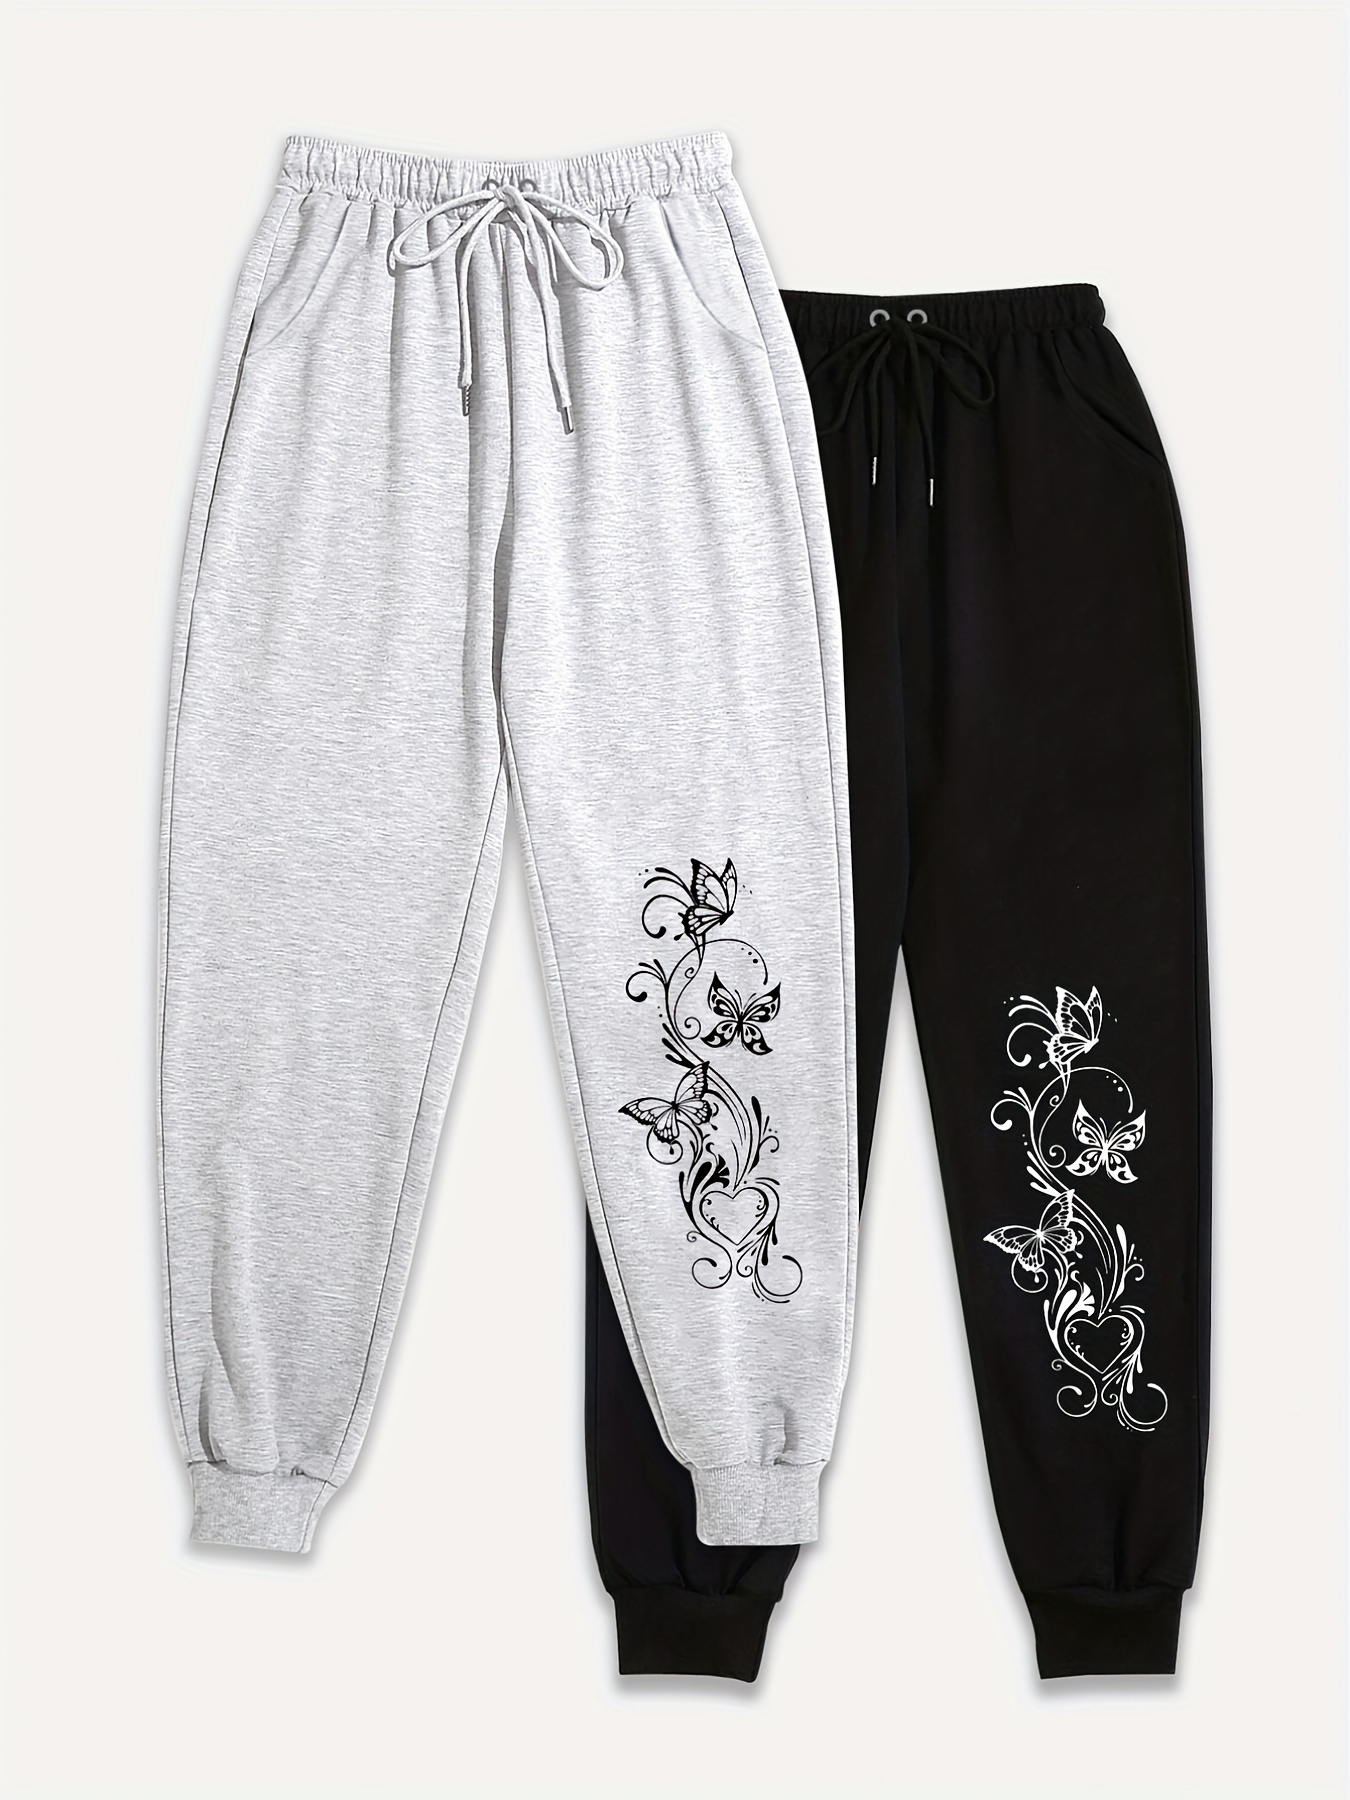 Butterfly Print Sweatpants 2 Pack, Drawstring Waist Comfy Casual Jogger  Pants, Women's Clothing